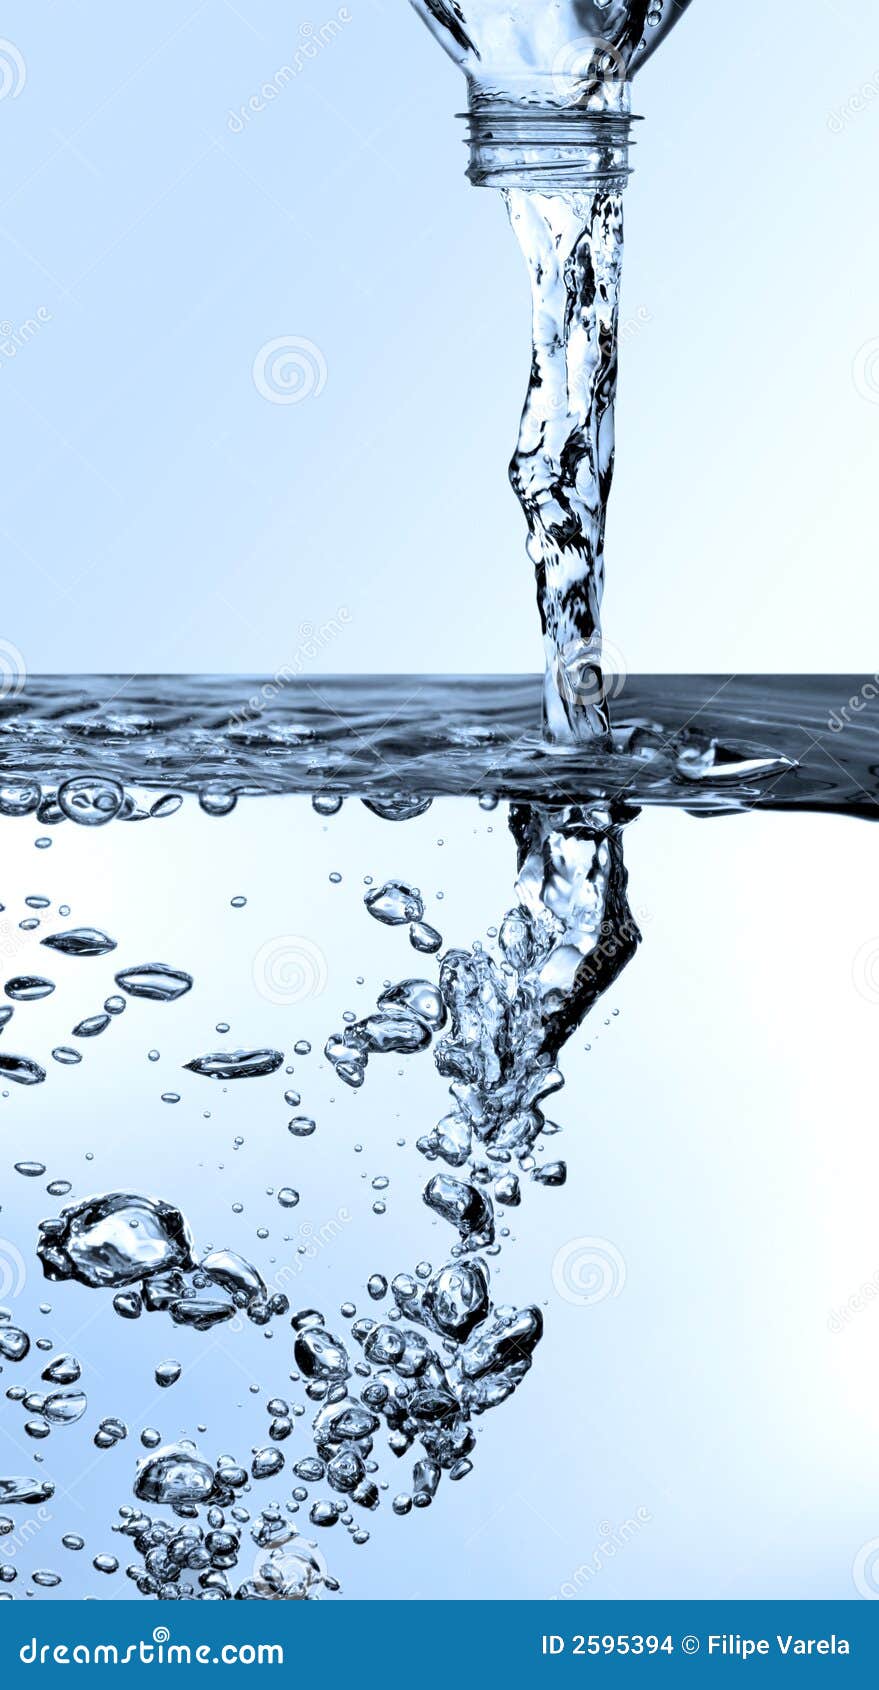 Pouring Water From A Bottle Stock Images - Image: 2595394